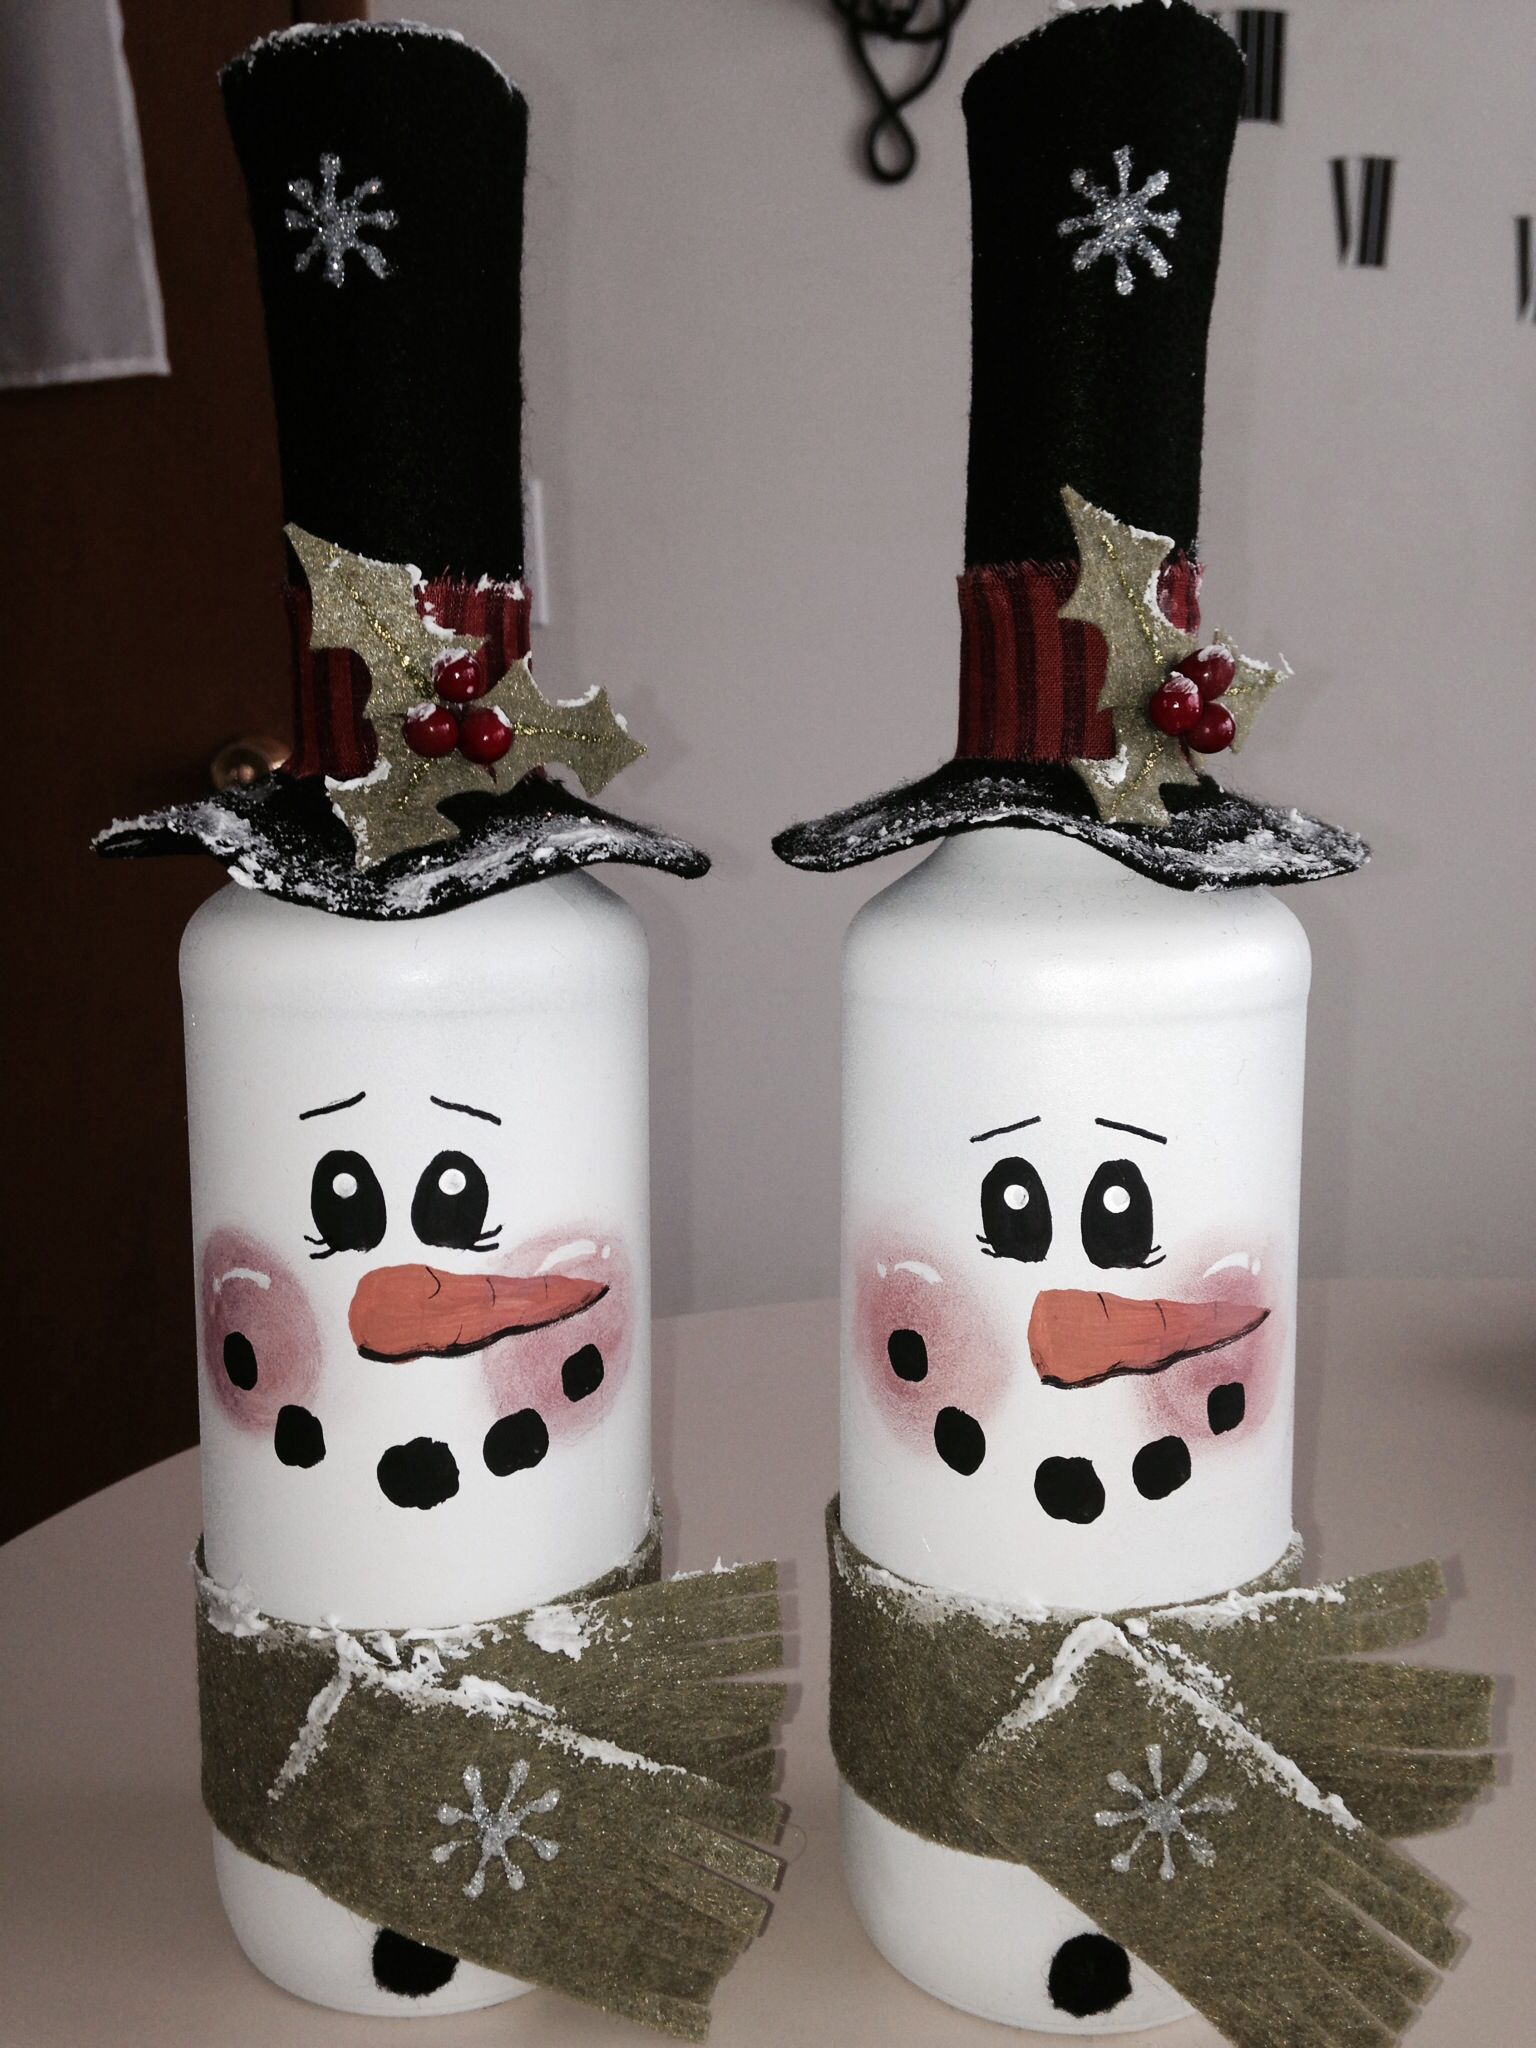 Spray painted wine bottles with painted faces and felt accessories! (Hat comes off to add lights inside bottle)